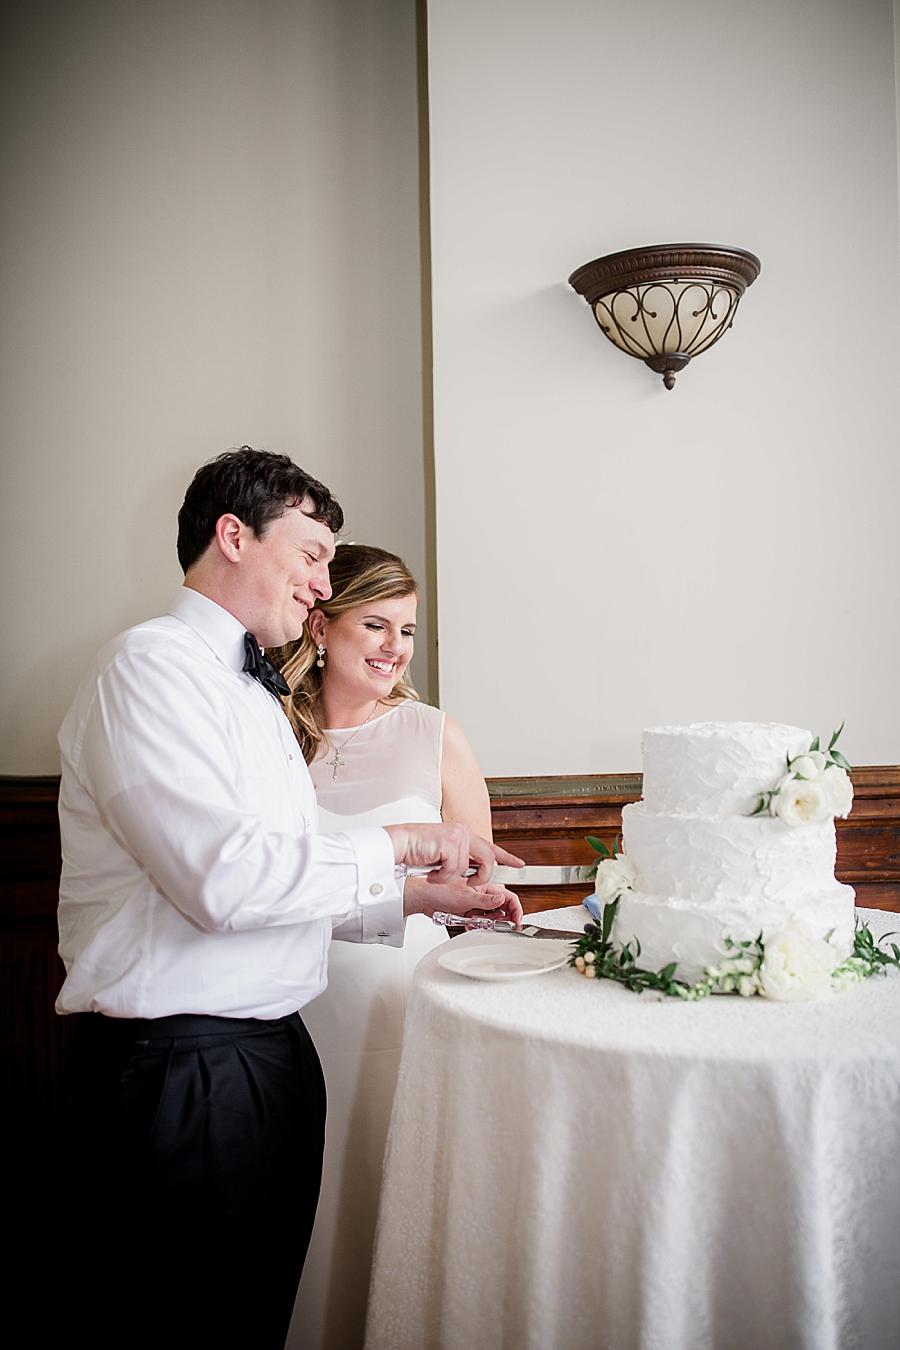 Cutting the cake at this Southern Railway Station Wedding by Knoxville Wedding Photographer, Amanda May Photos.